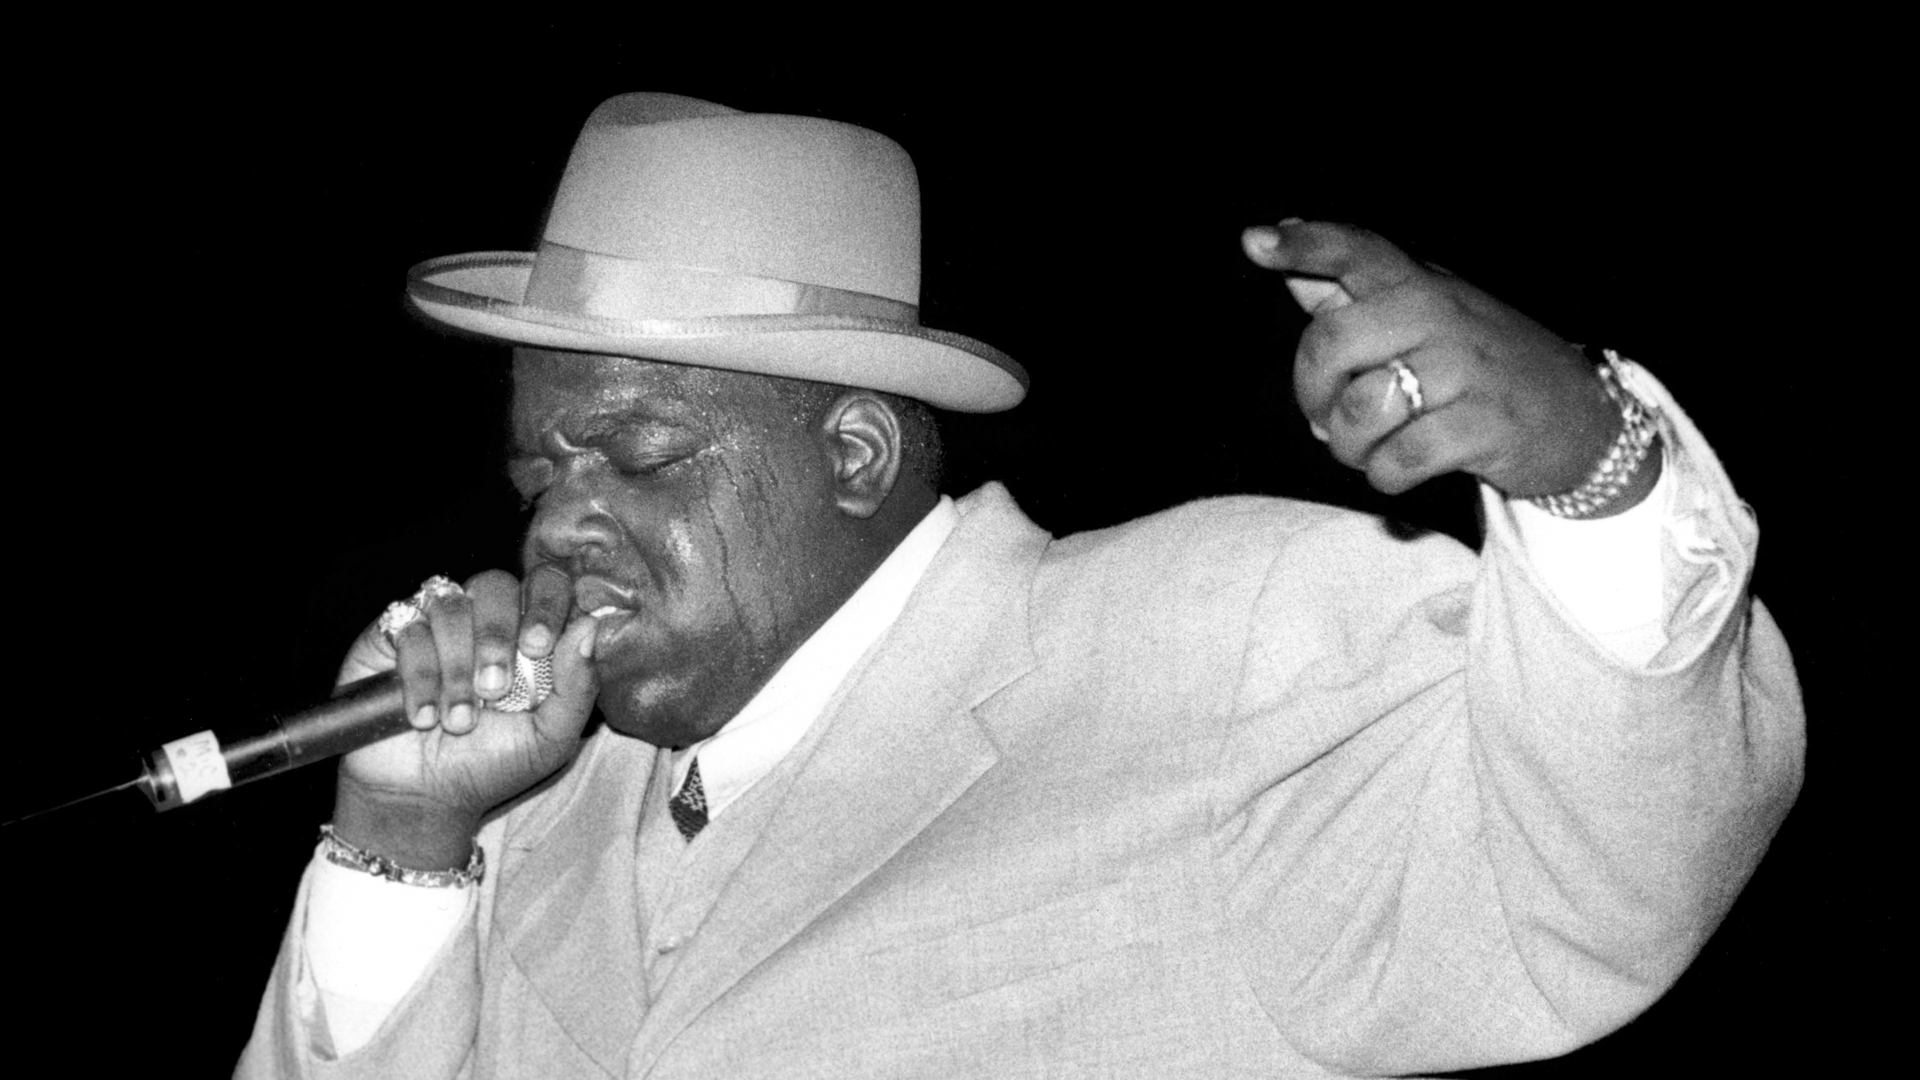 Thinking Big: The Grit and Glamour of the Notorious B.I.G